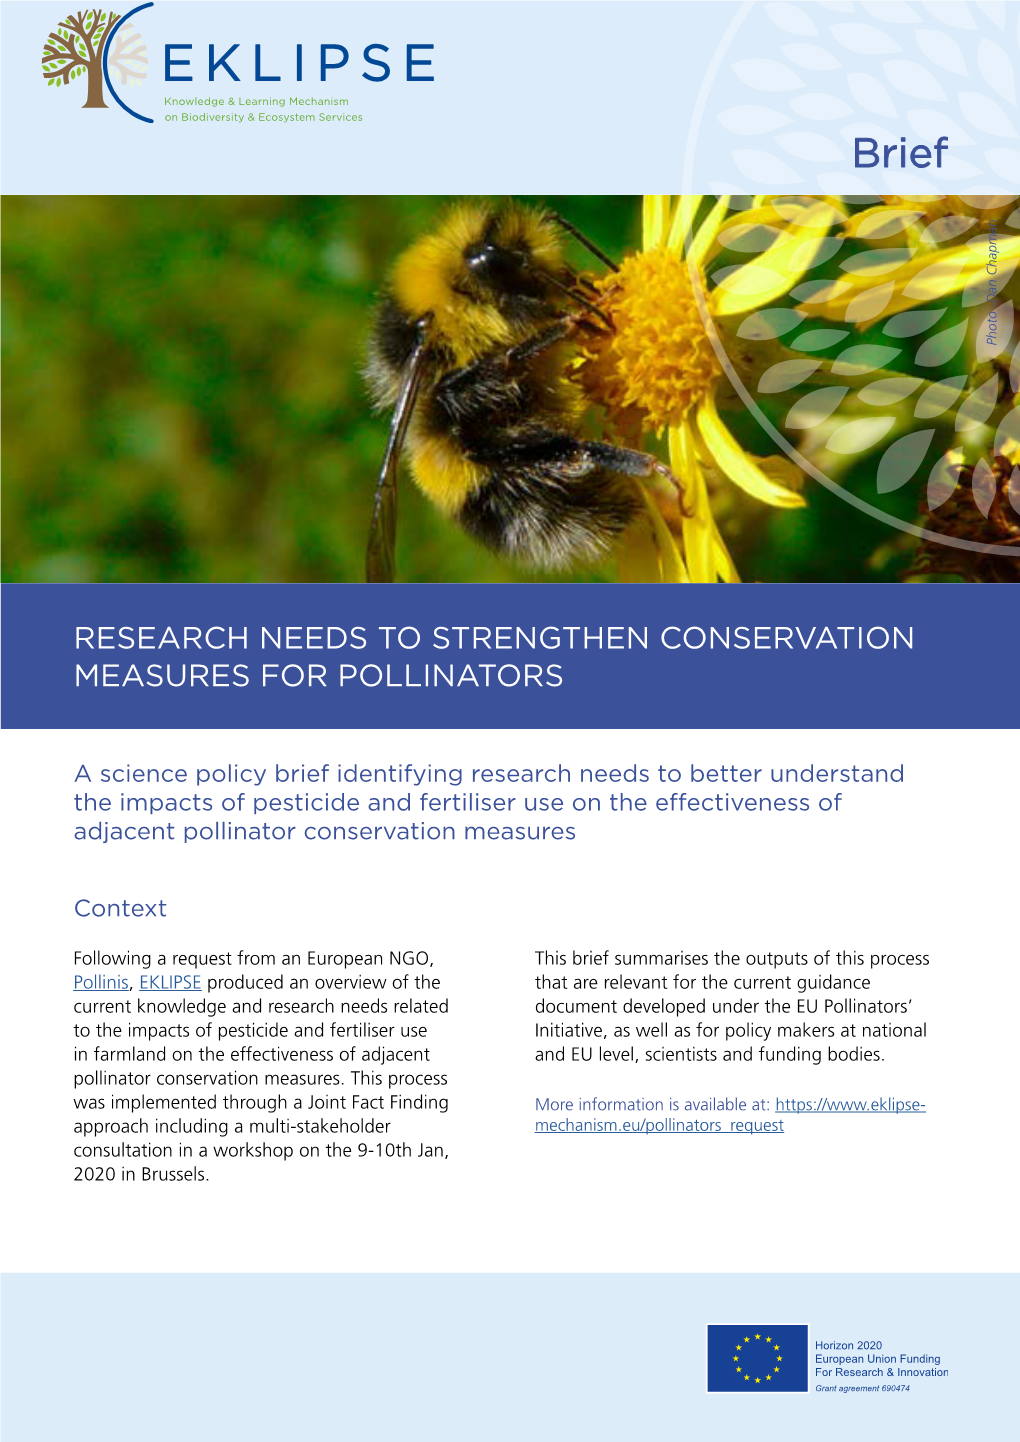 Research Needs to Strengthen Conservation Measures for Pollinators